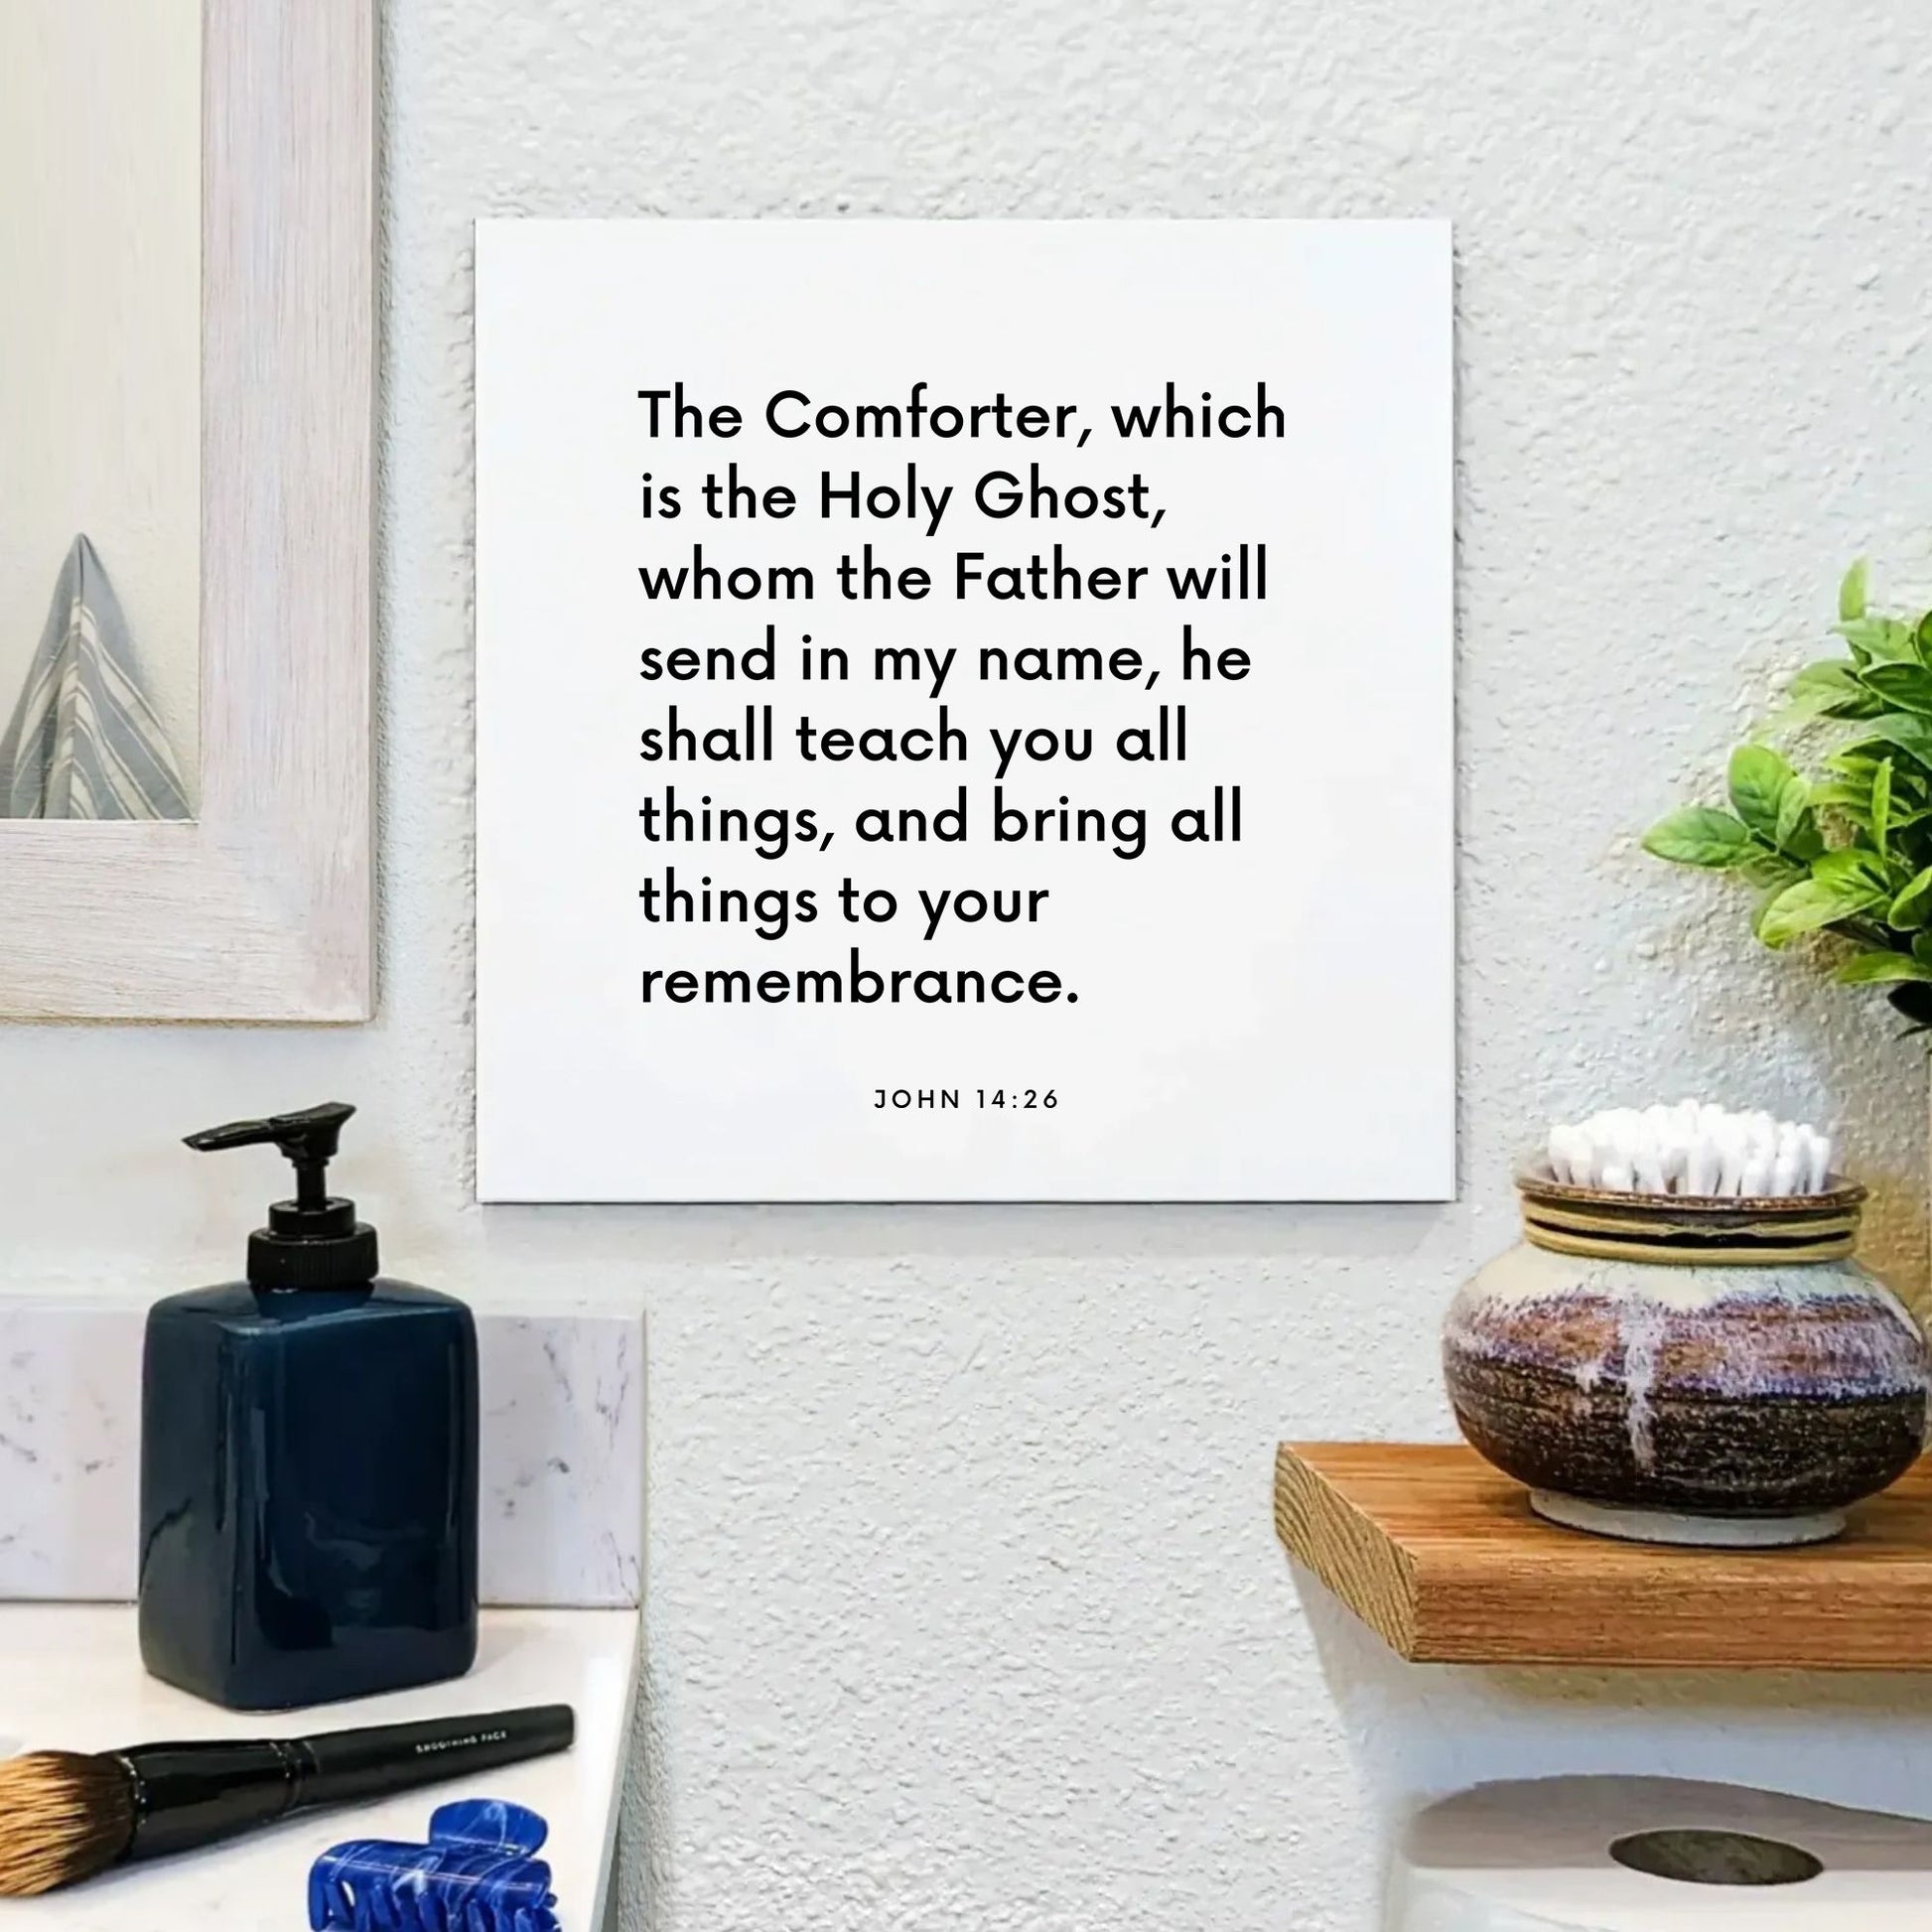 Bathroom mouting of the scripture tile for John 14:26 - "The Comforter shall teach you all things"